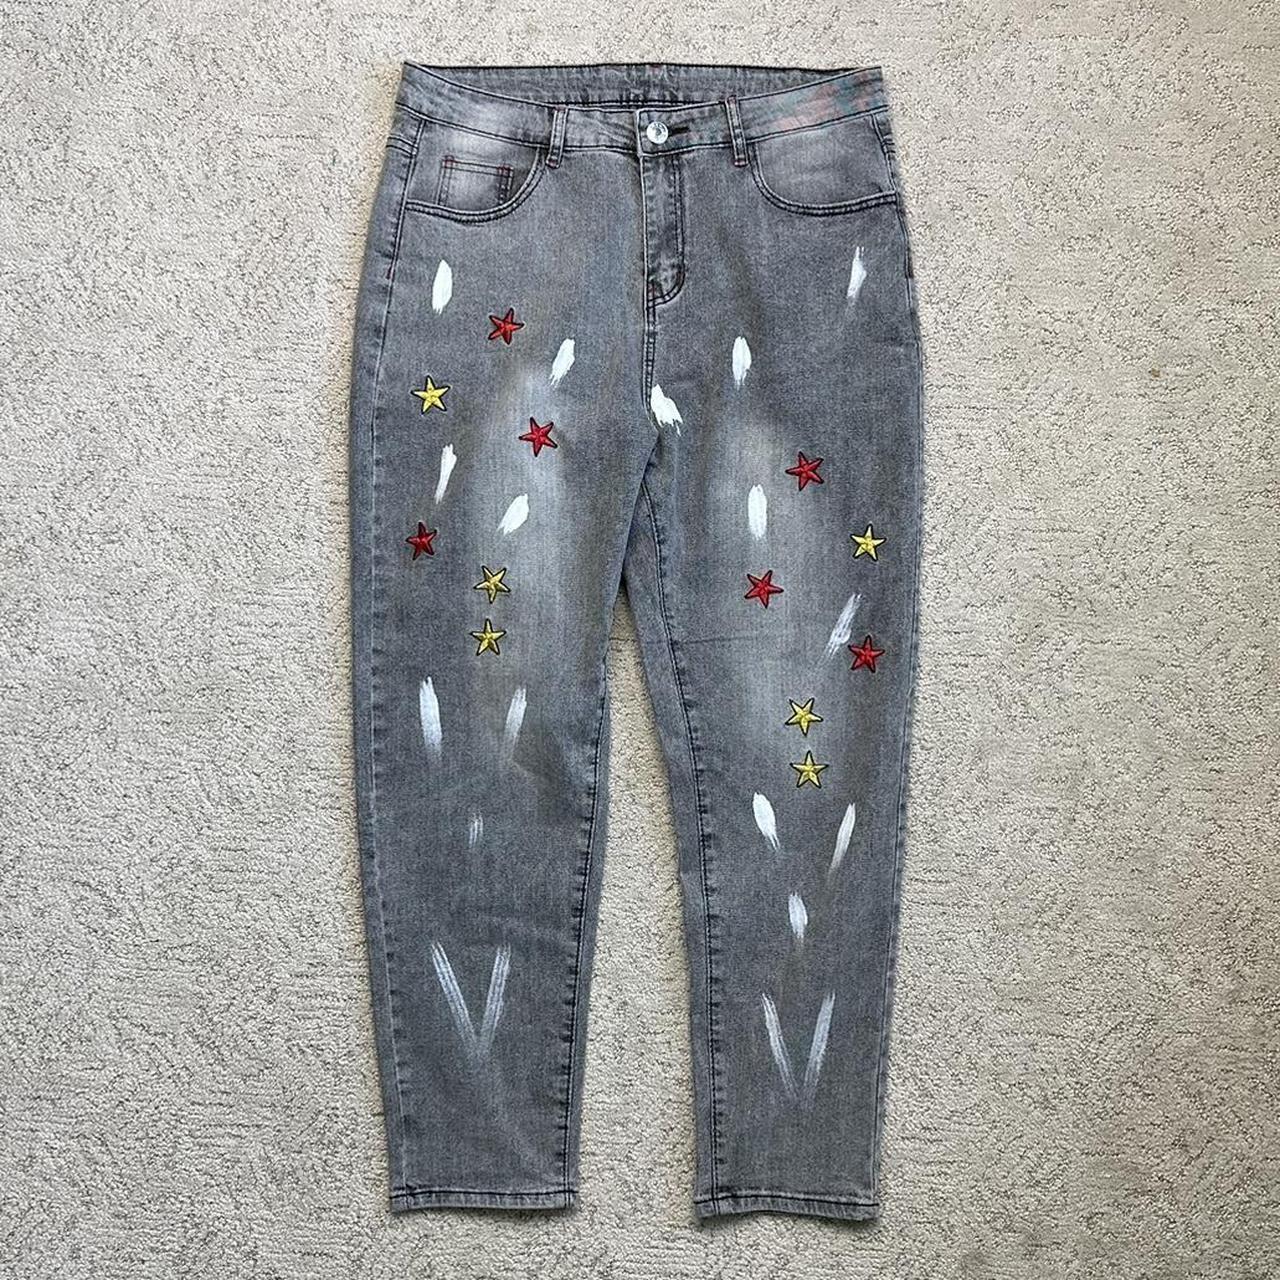 Romwe Men's Grey and Red Jeans | Depop